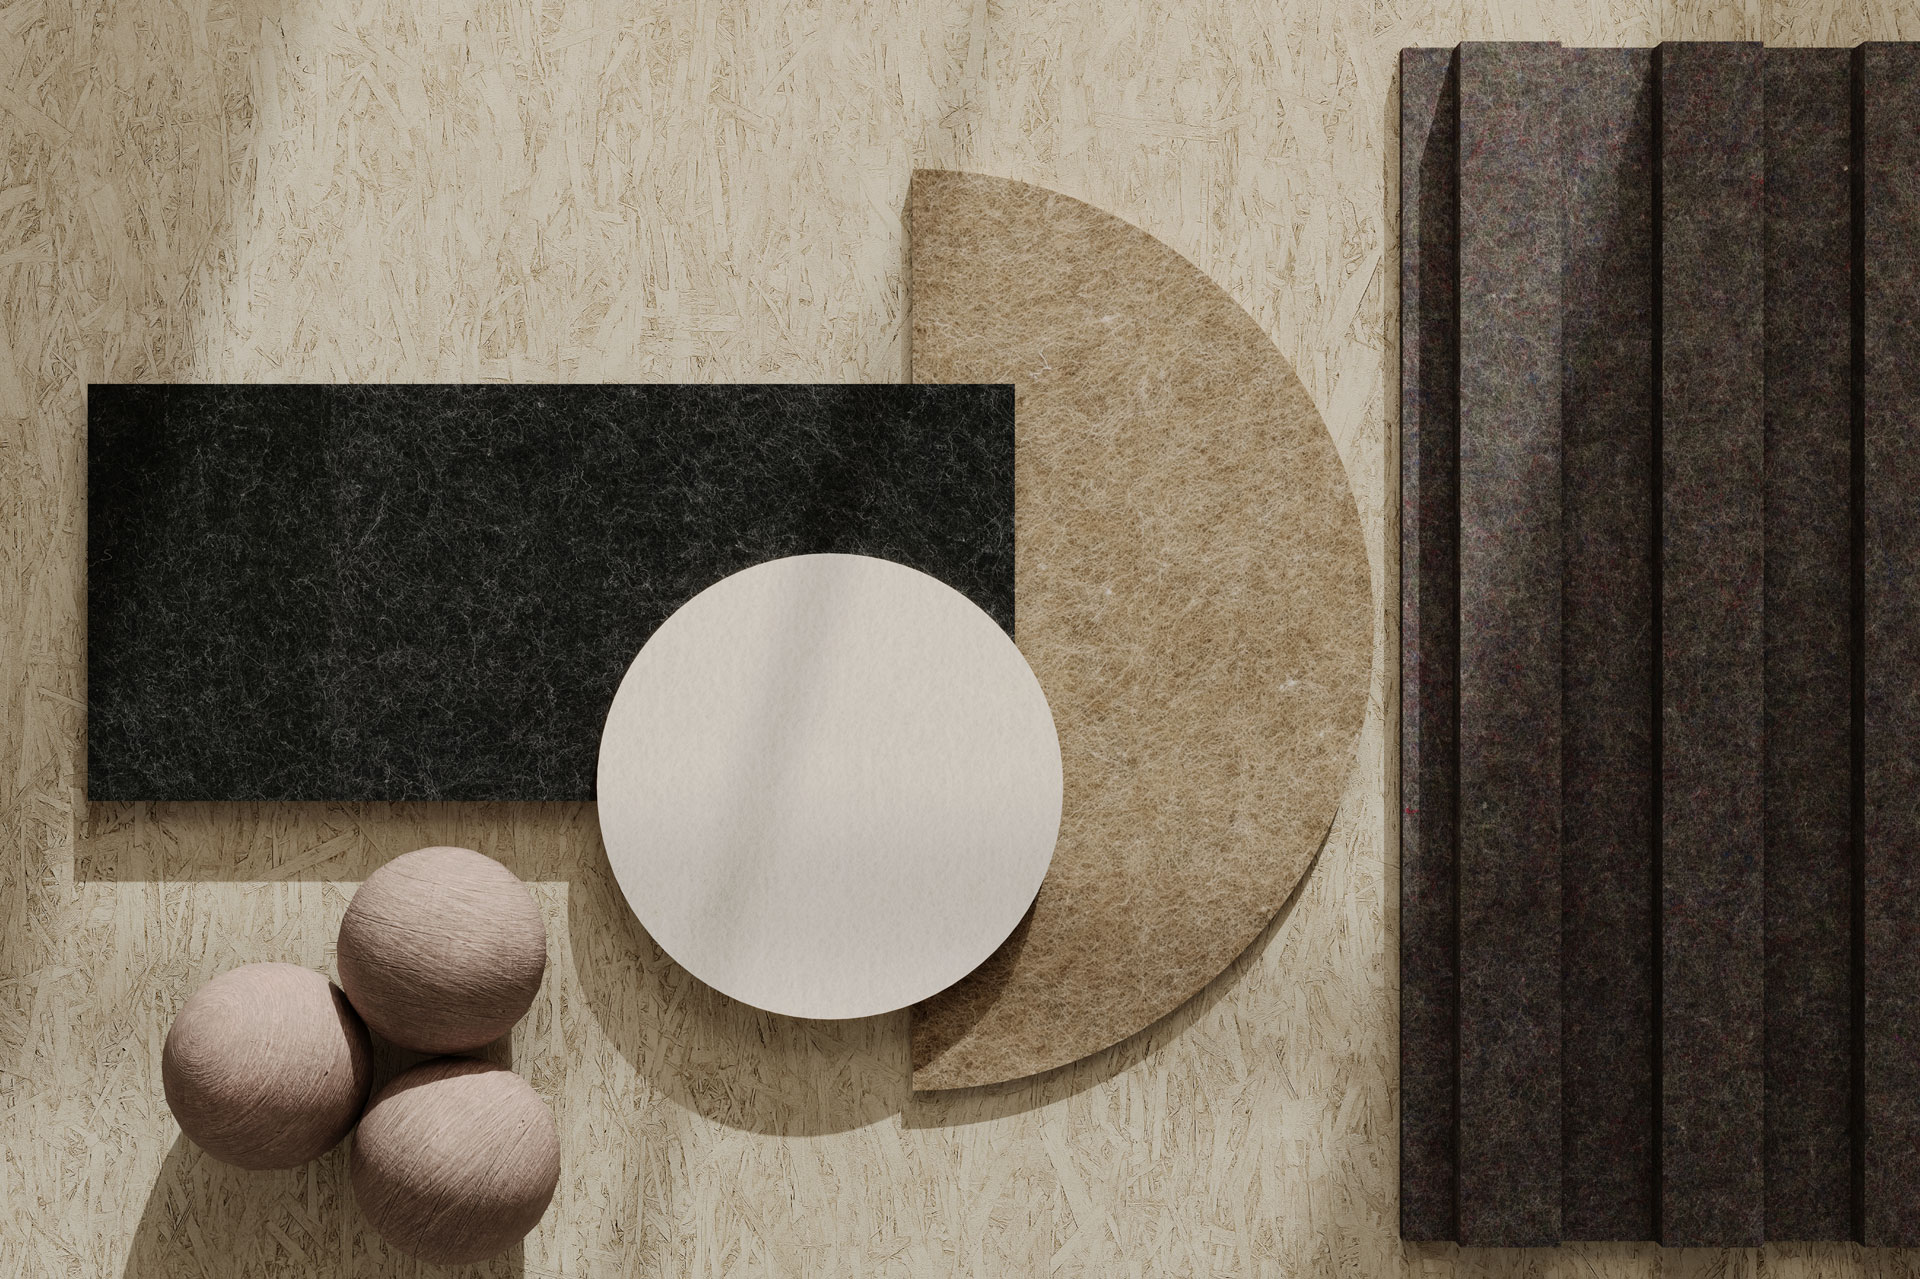 A top-down view of a minimalist acoustic felt arrangement featuring geometric shapes and textures. It includes a black rectangle, a circular disc, a textured semicircle, and a series of vertical dark panels. Three beige yarn balls sit on the left, casting soft shadows over the naturals-inspired design.